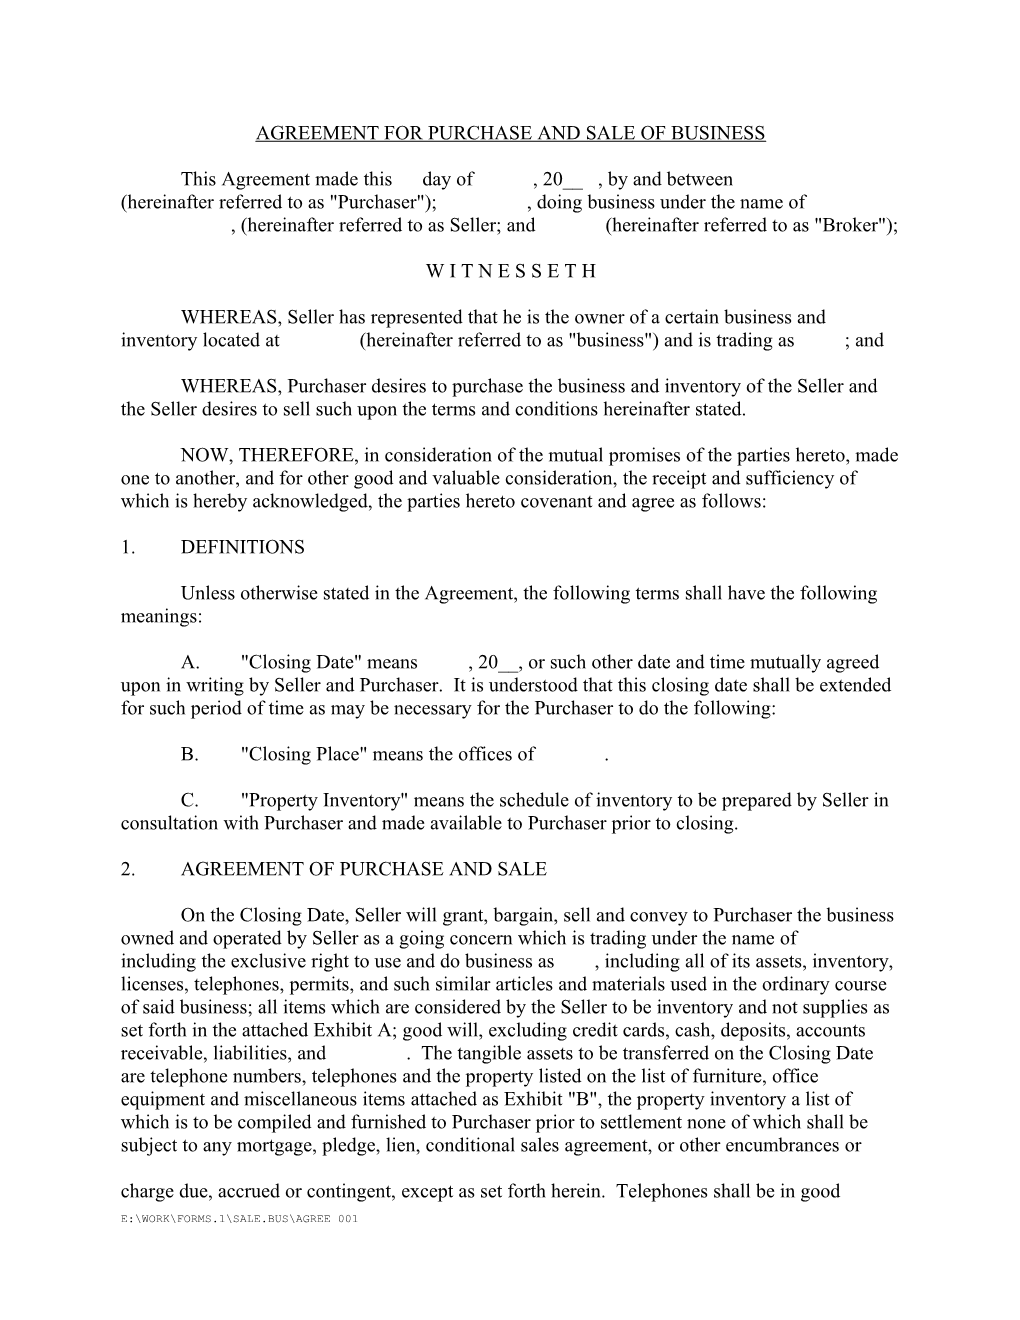 Agreement for Purchase and Sale of Business